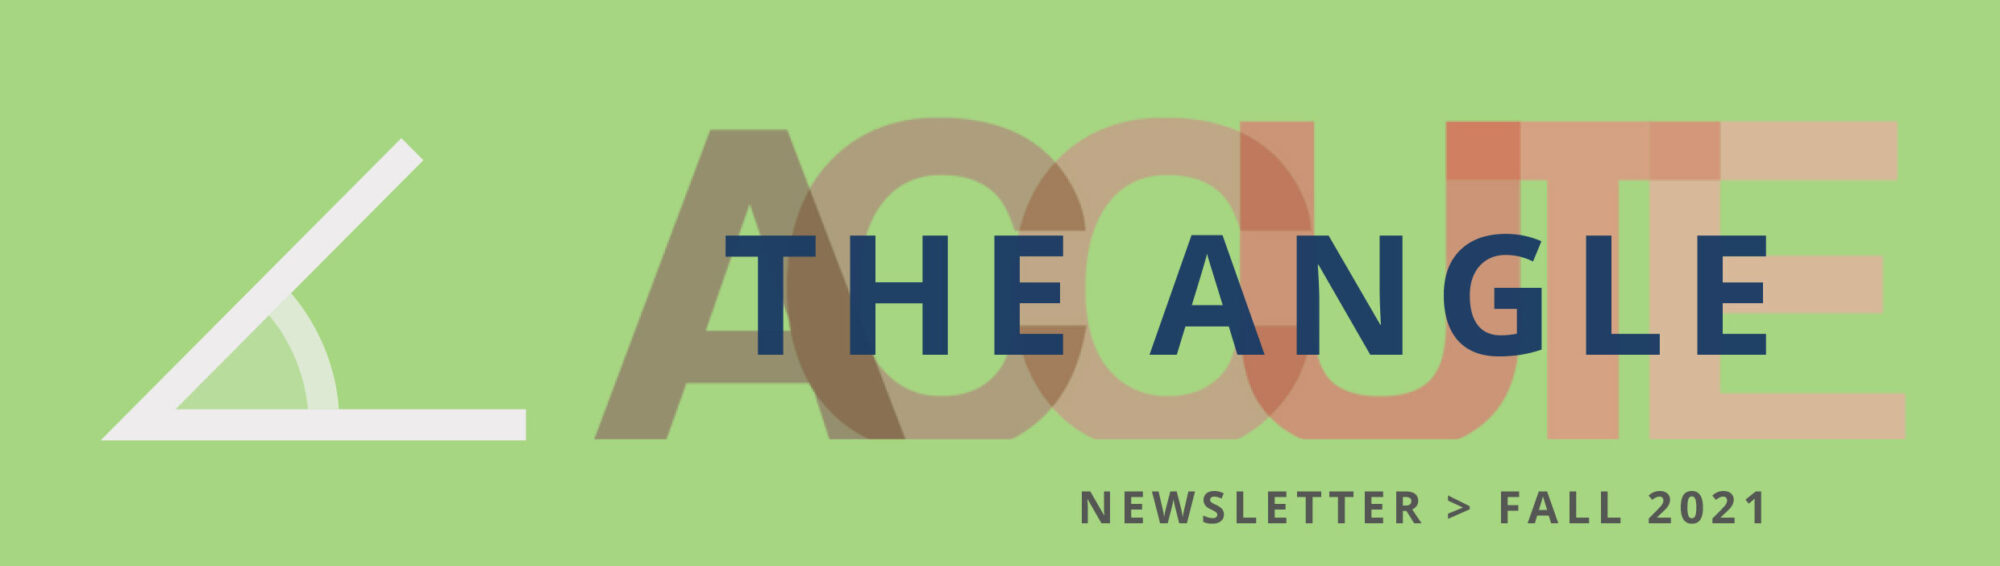 Newsletter Header Graphic for The Angle Fall 2021 issue by ACCUTE